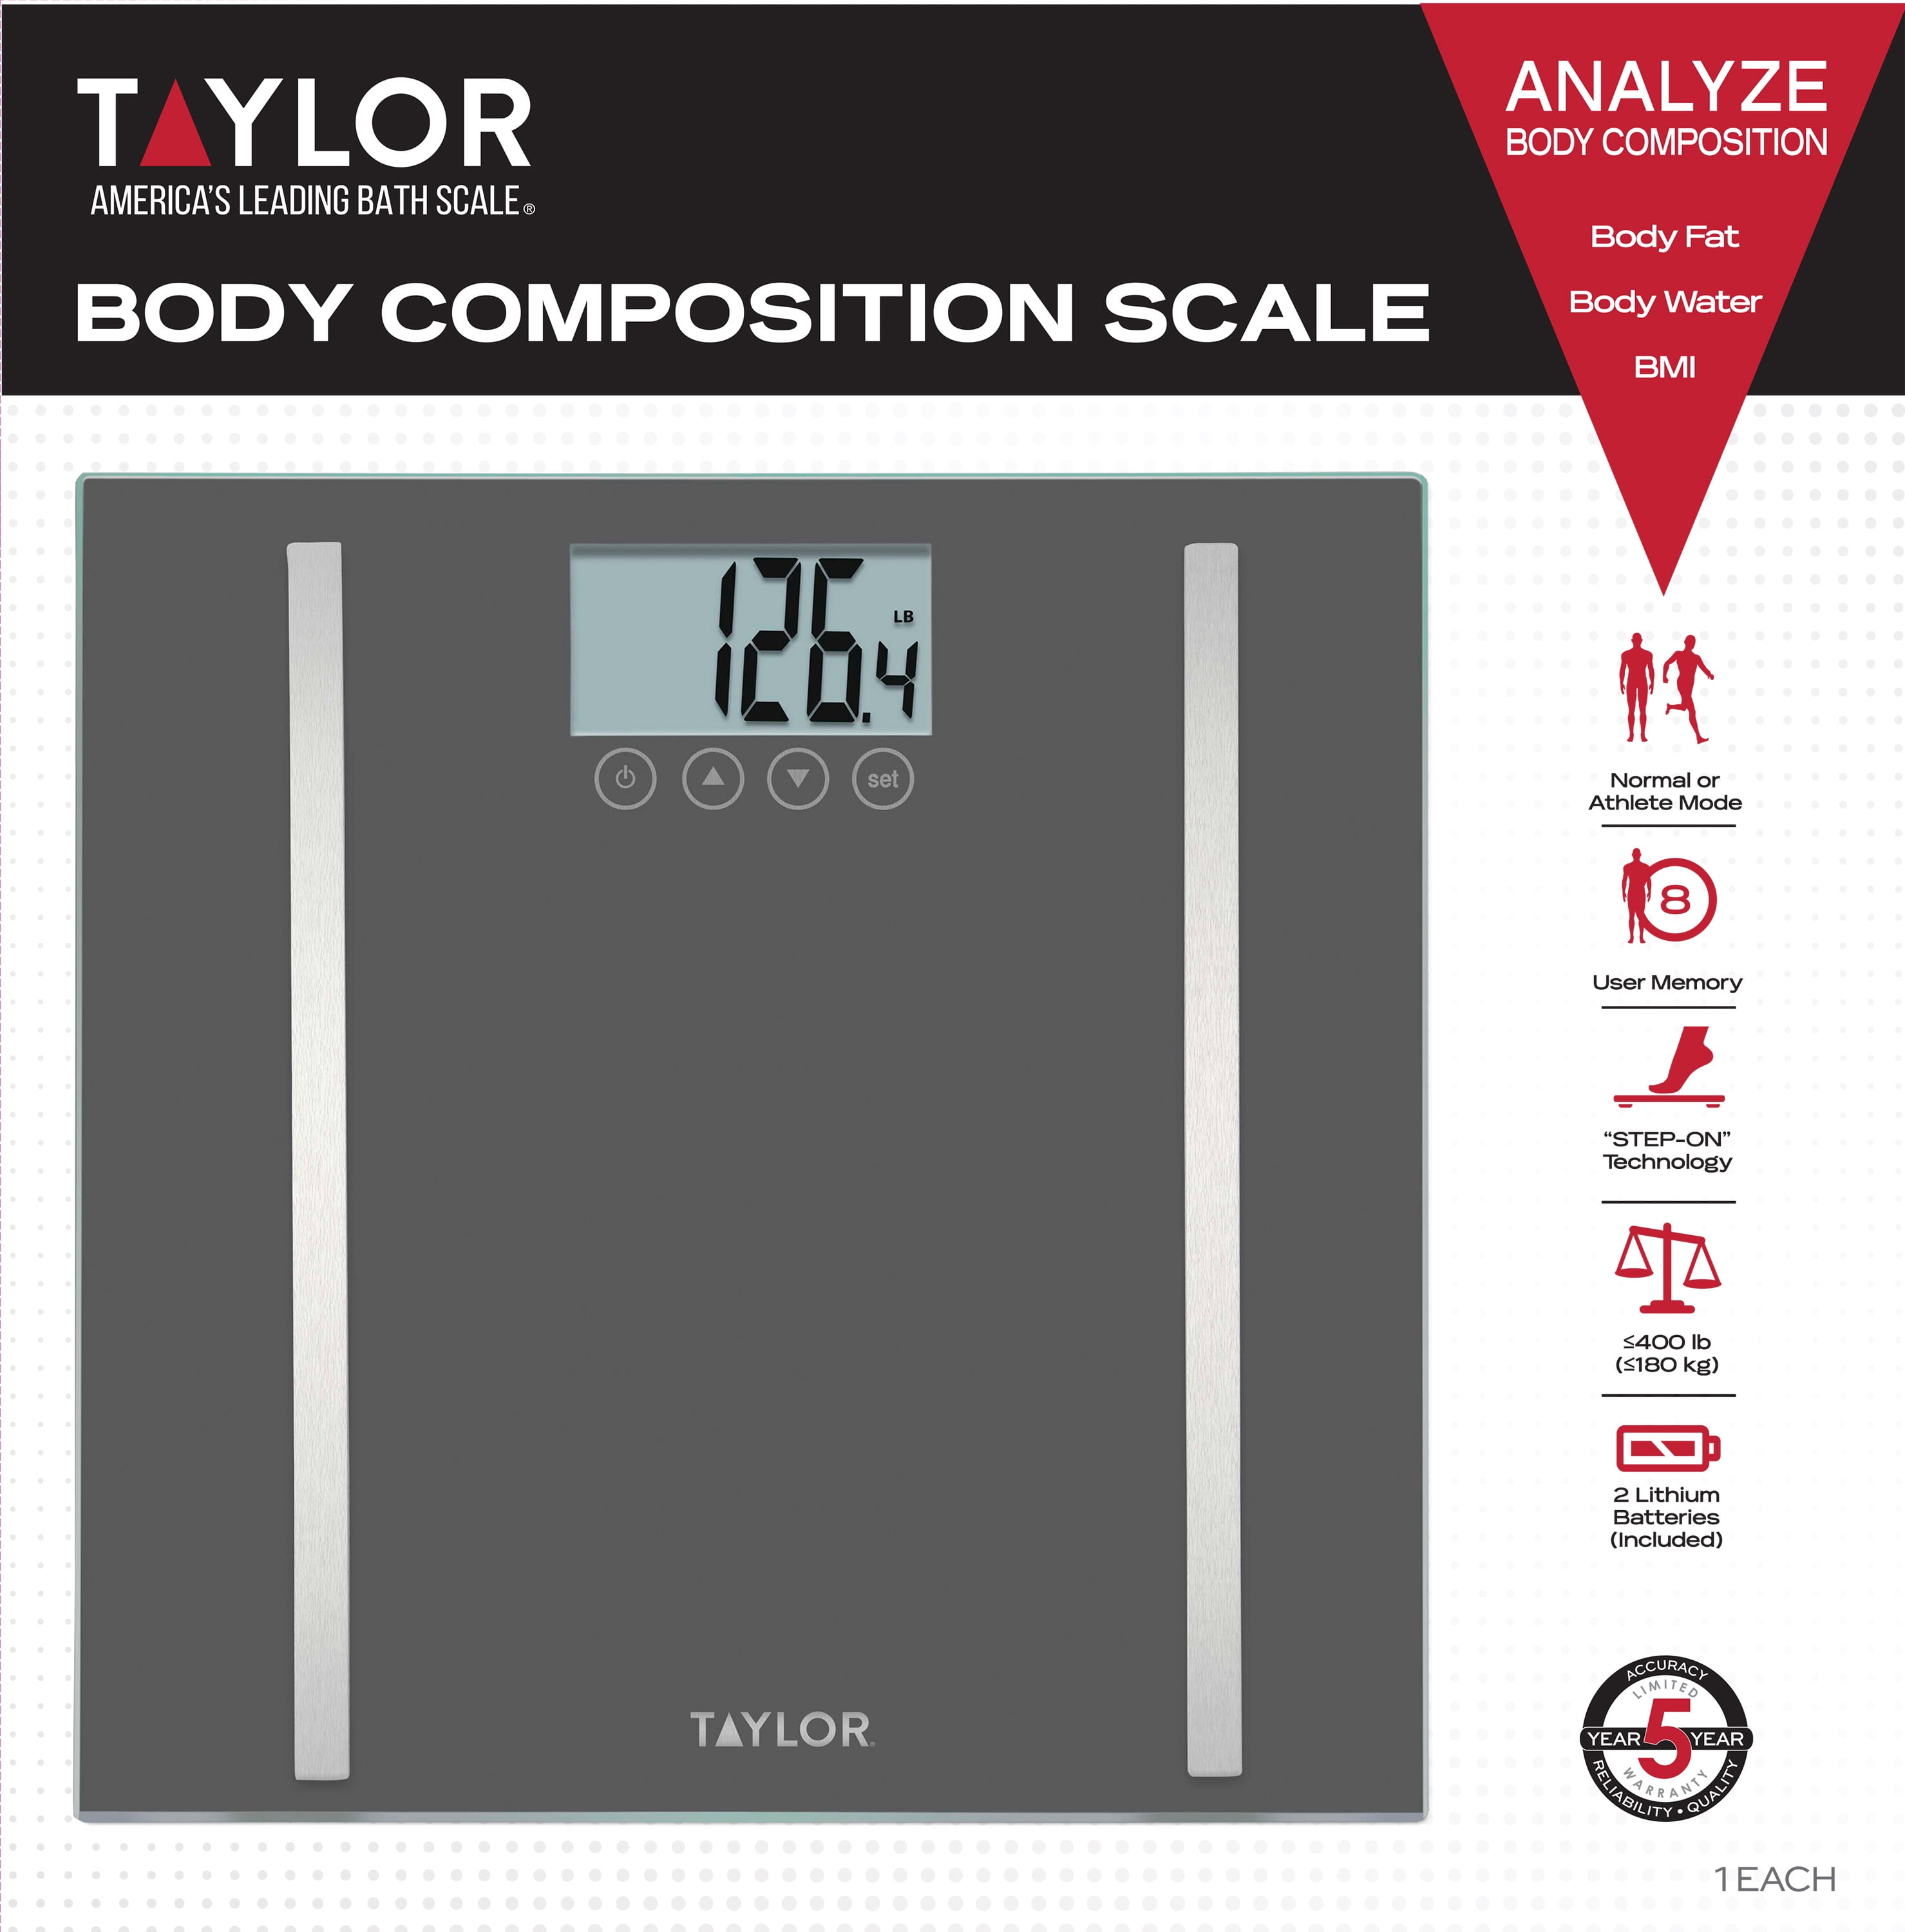 Body Composition Scale with Body Fat, Body Water and BMI – Taylor USA